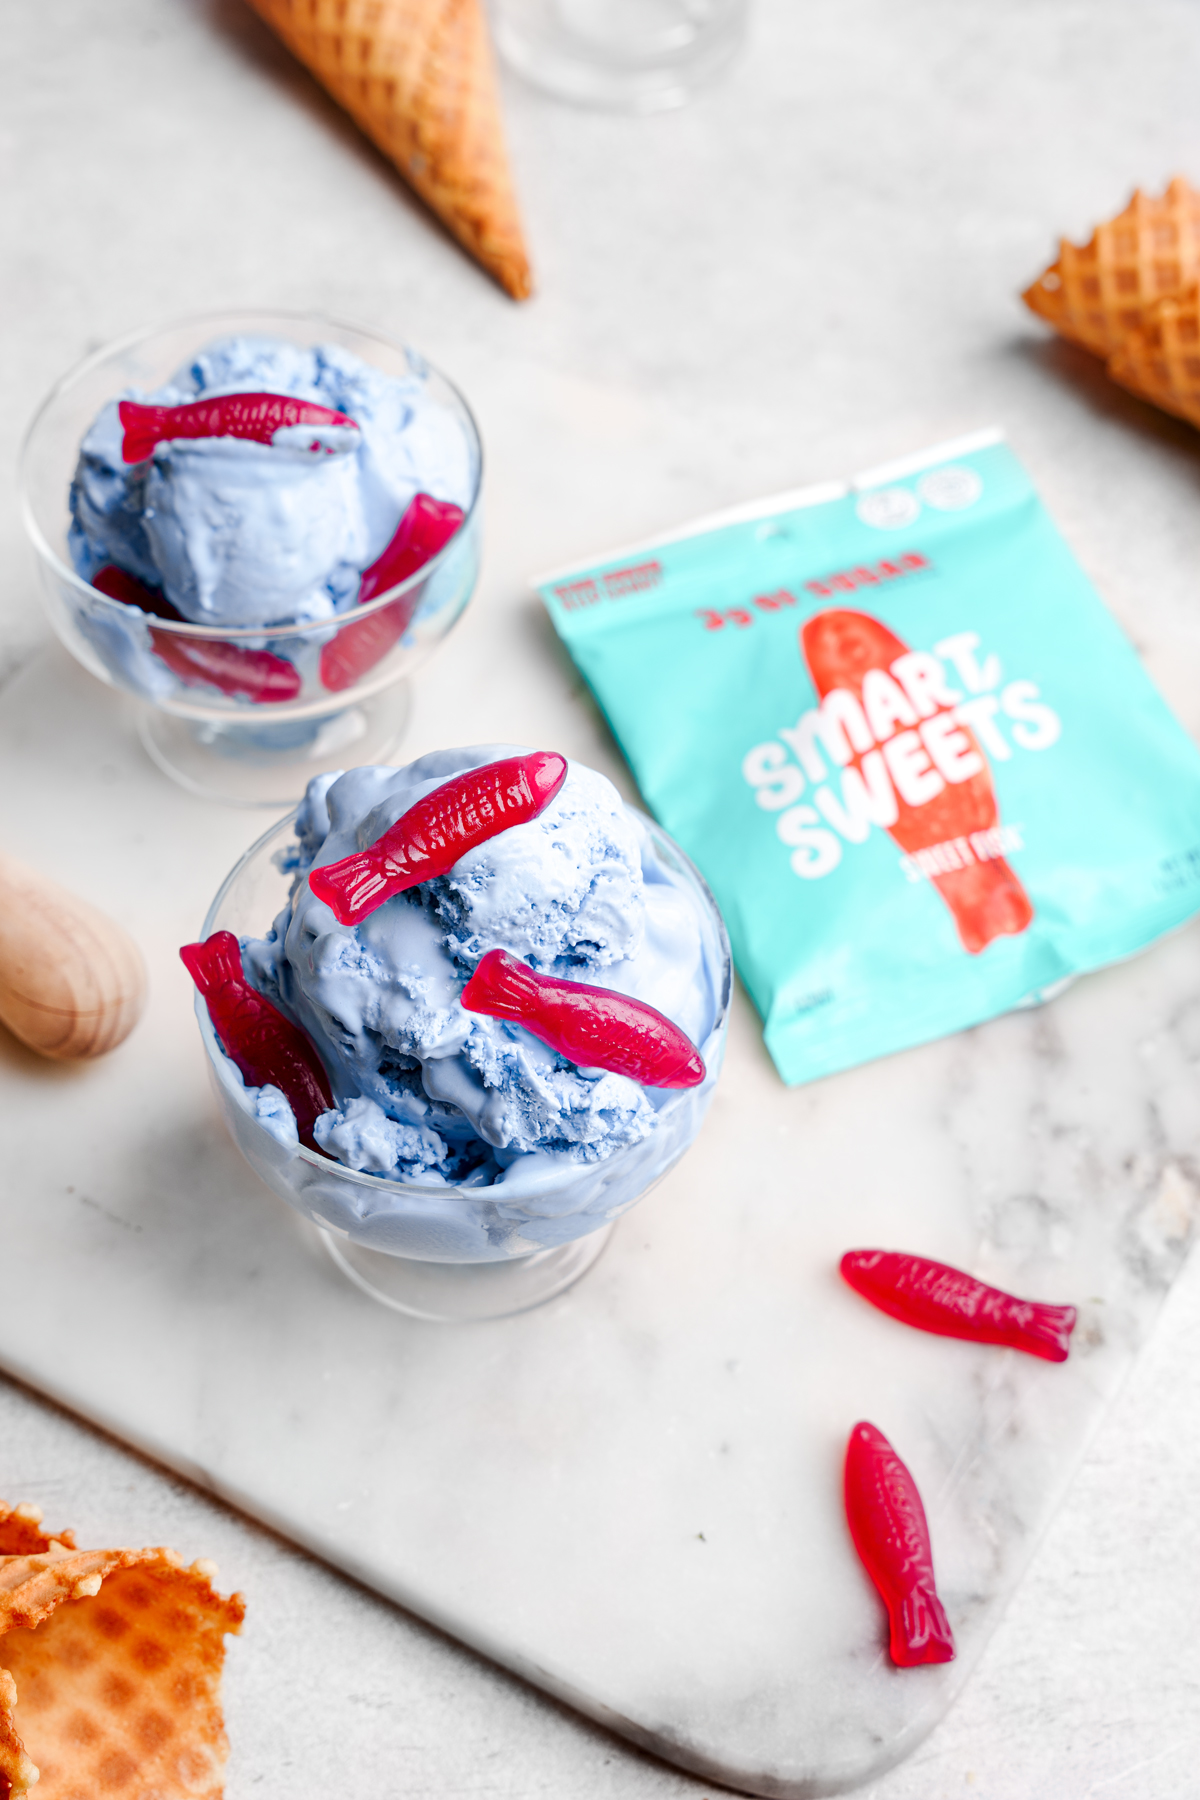 the blue candy ice cream next to the smart sweets sweet fish candy package